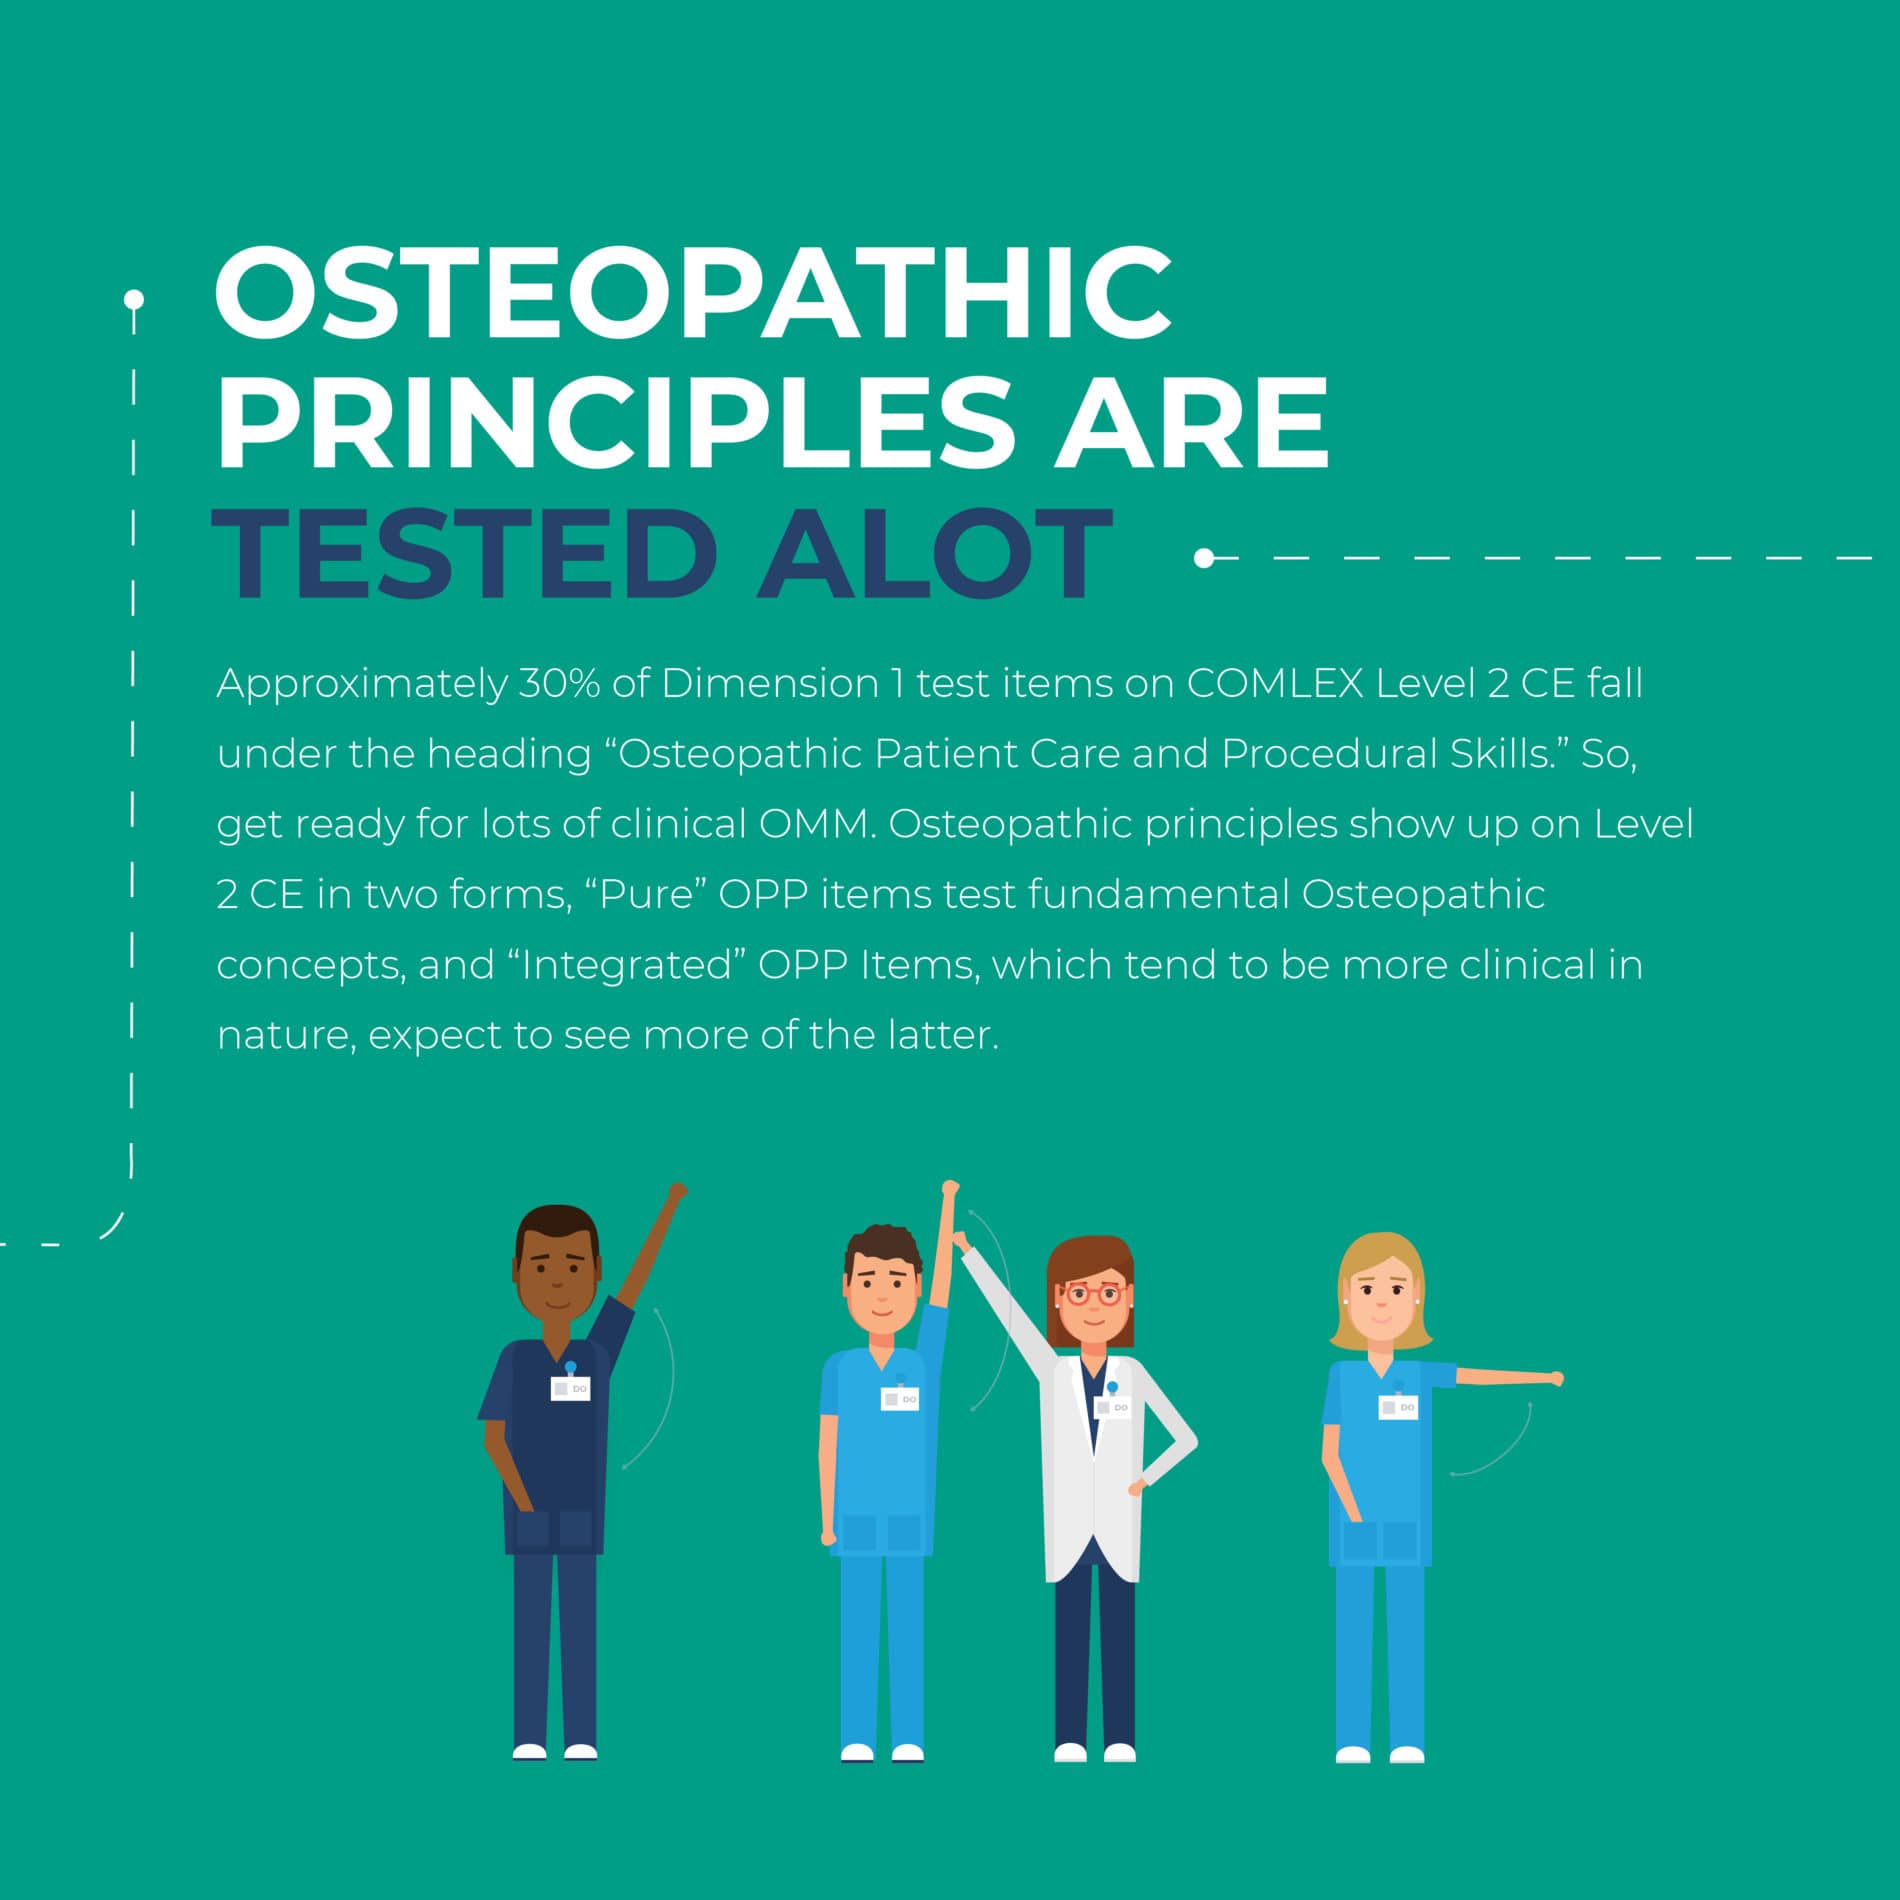 osteopathic princiles are tested a lot